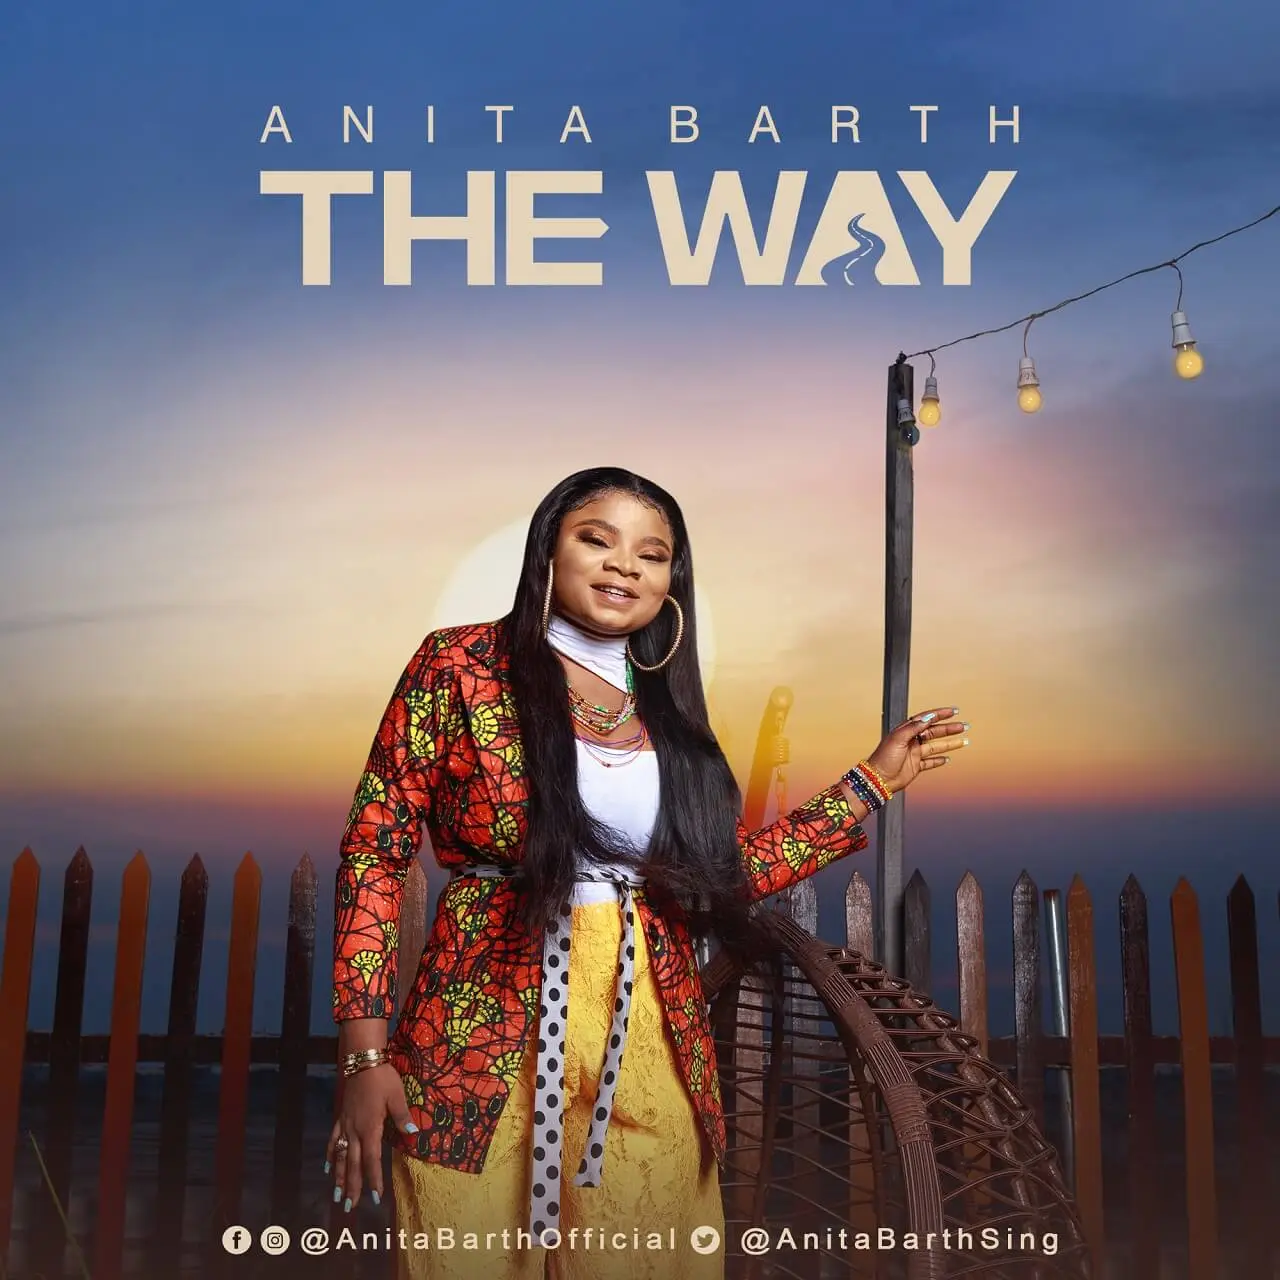 [Music Video] Jesus is “The Way” – Anita Barth Affirms in New Song